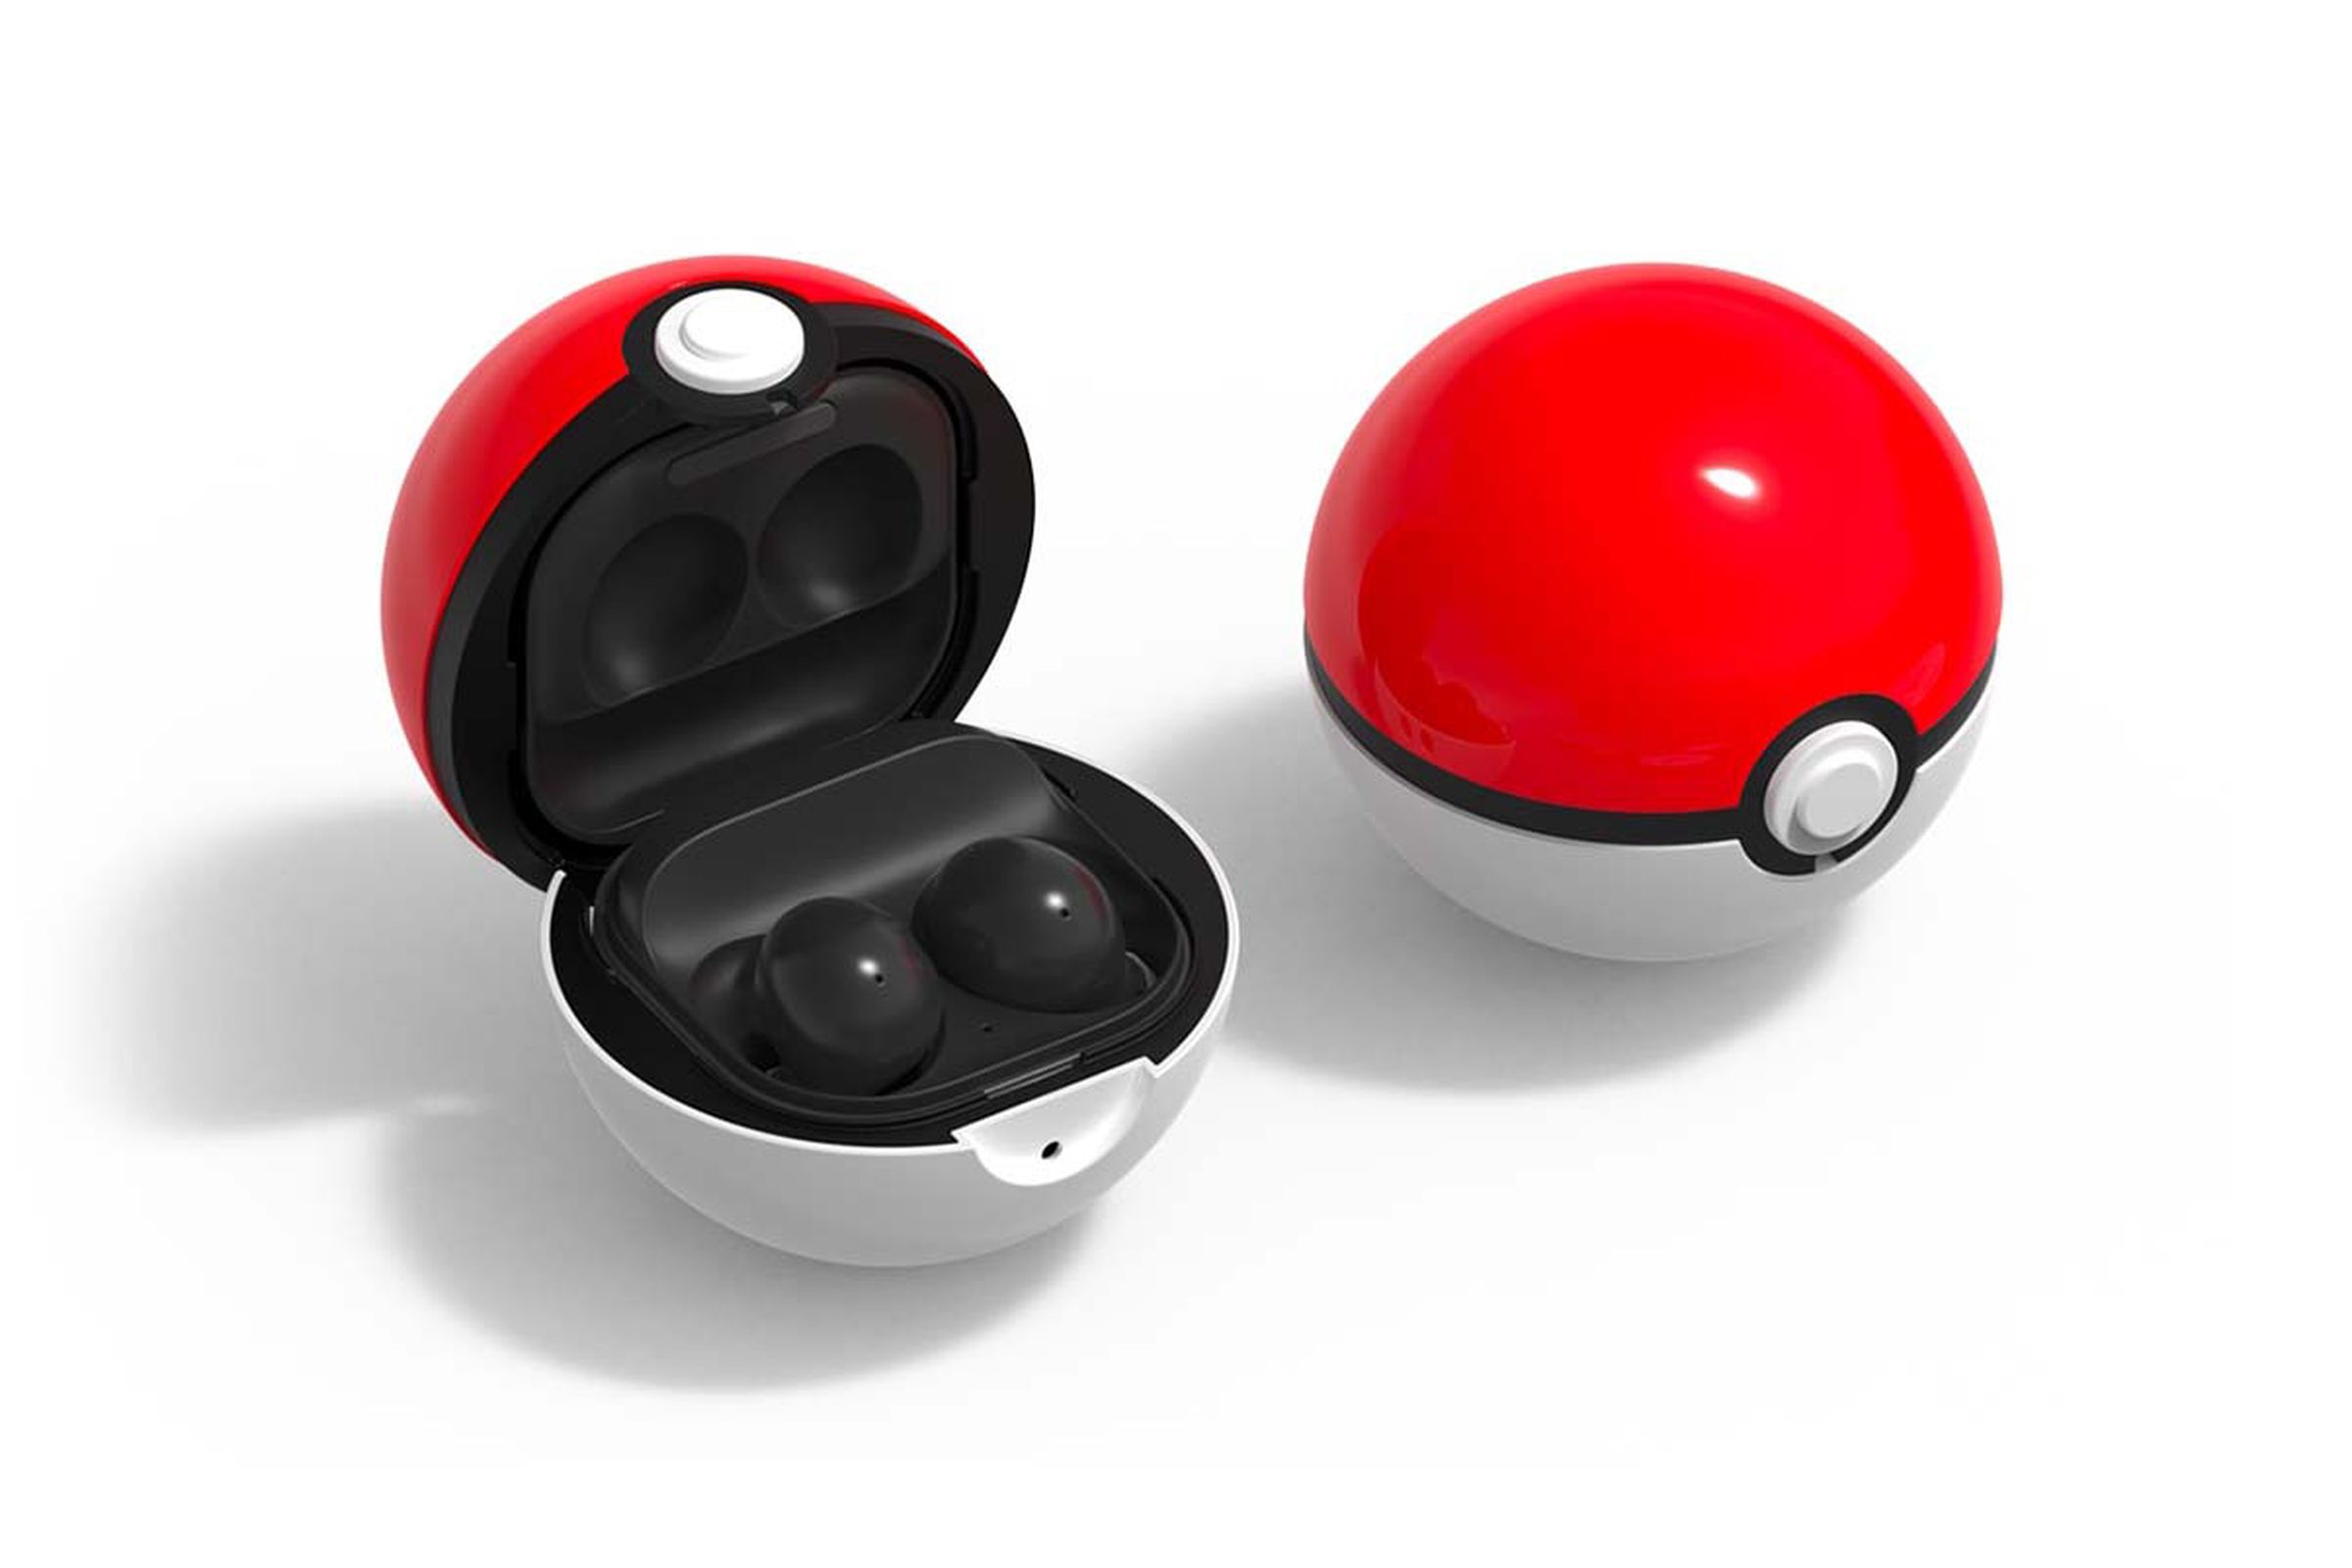 The ball is designed for you to put the entire charging case in it.